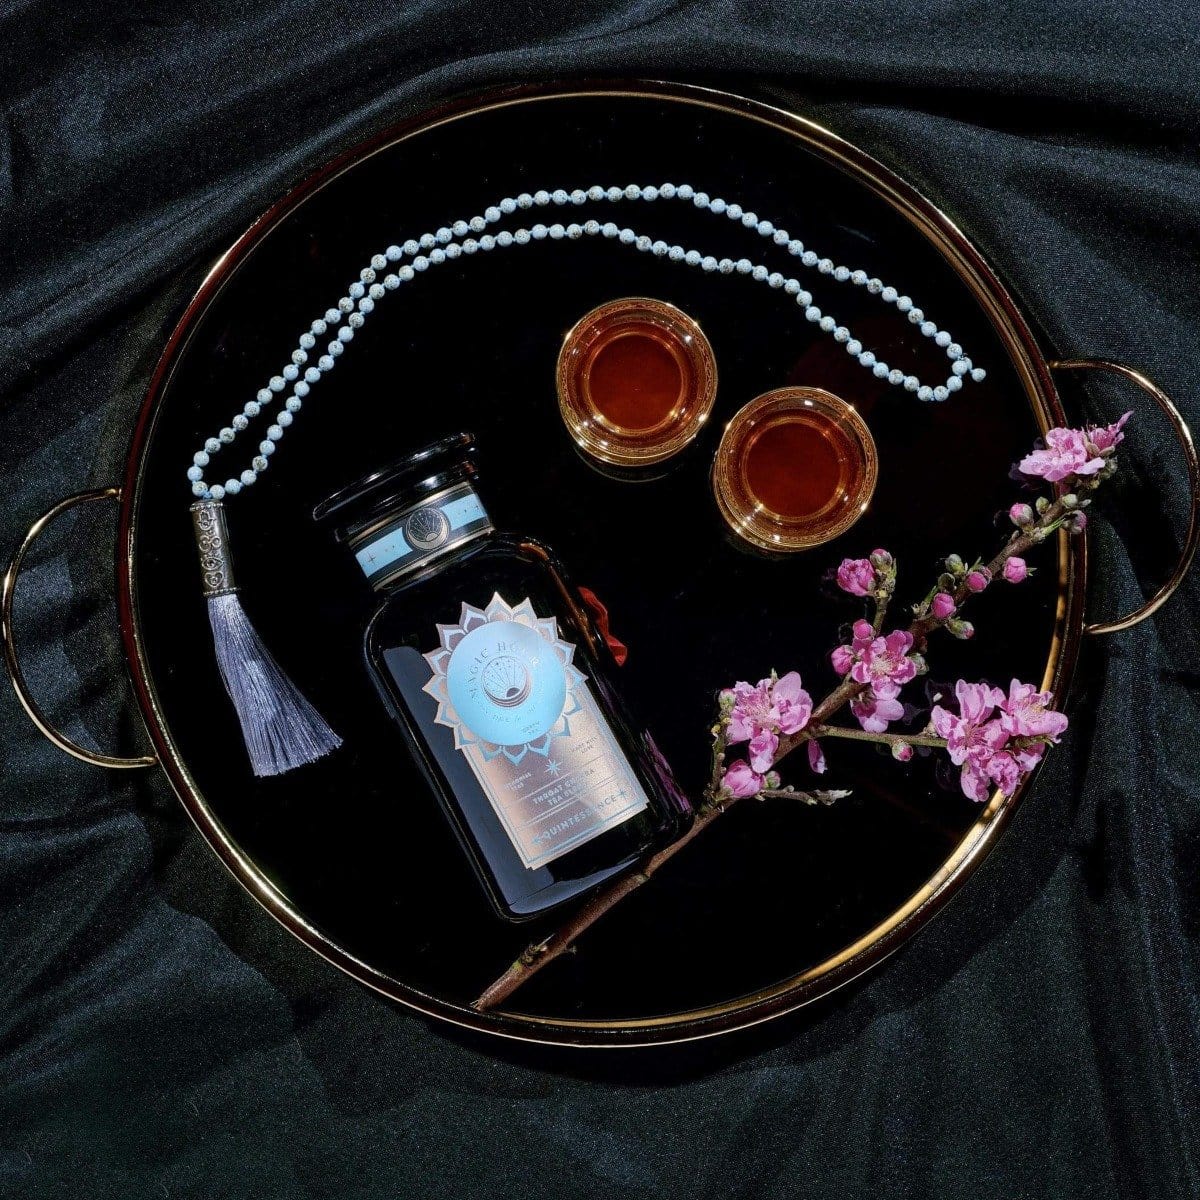 A decorative tray holds a perfume bottle with a light blue tassel, a string of white beads, two small cups filled with Magic Hour's Quintessence™ Tea for Opening & Healing the Throat Chakra amber liquid, and a sprig of pink flowers. The tray, adorned with golden handles, rests elegantly on dark, textured fabric.